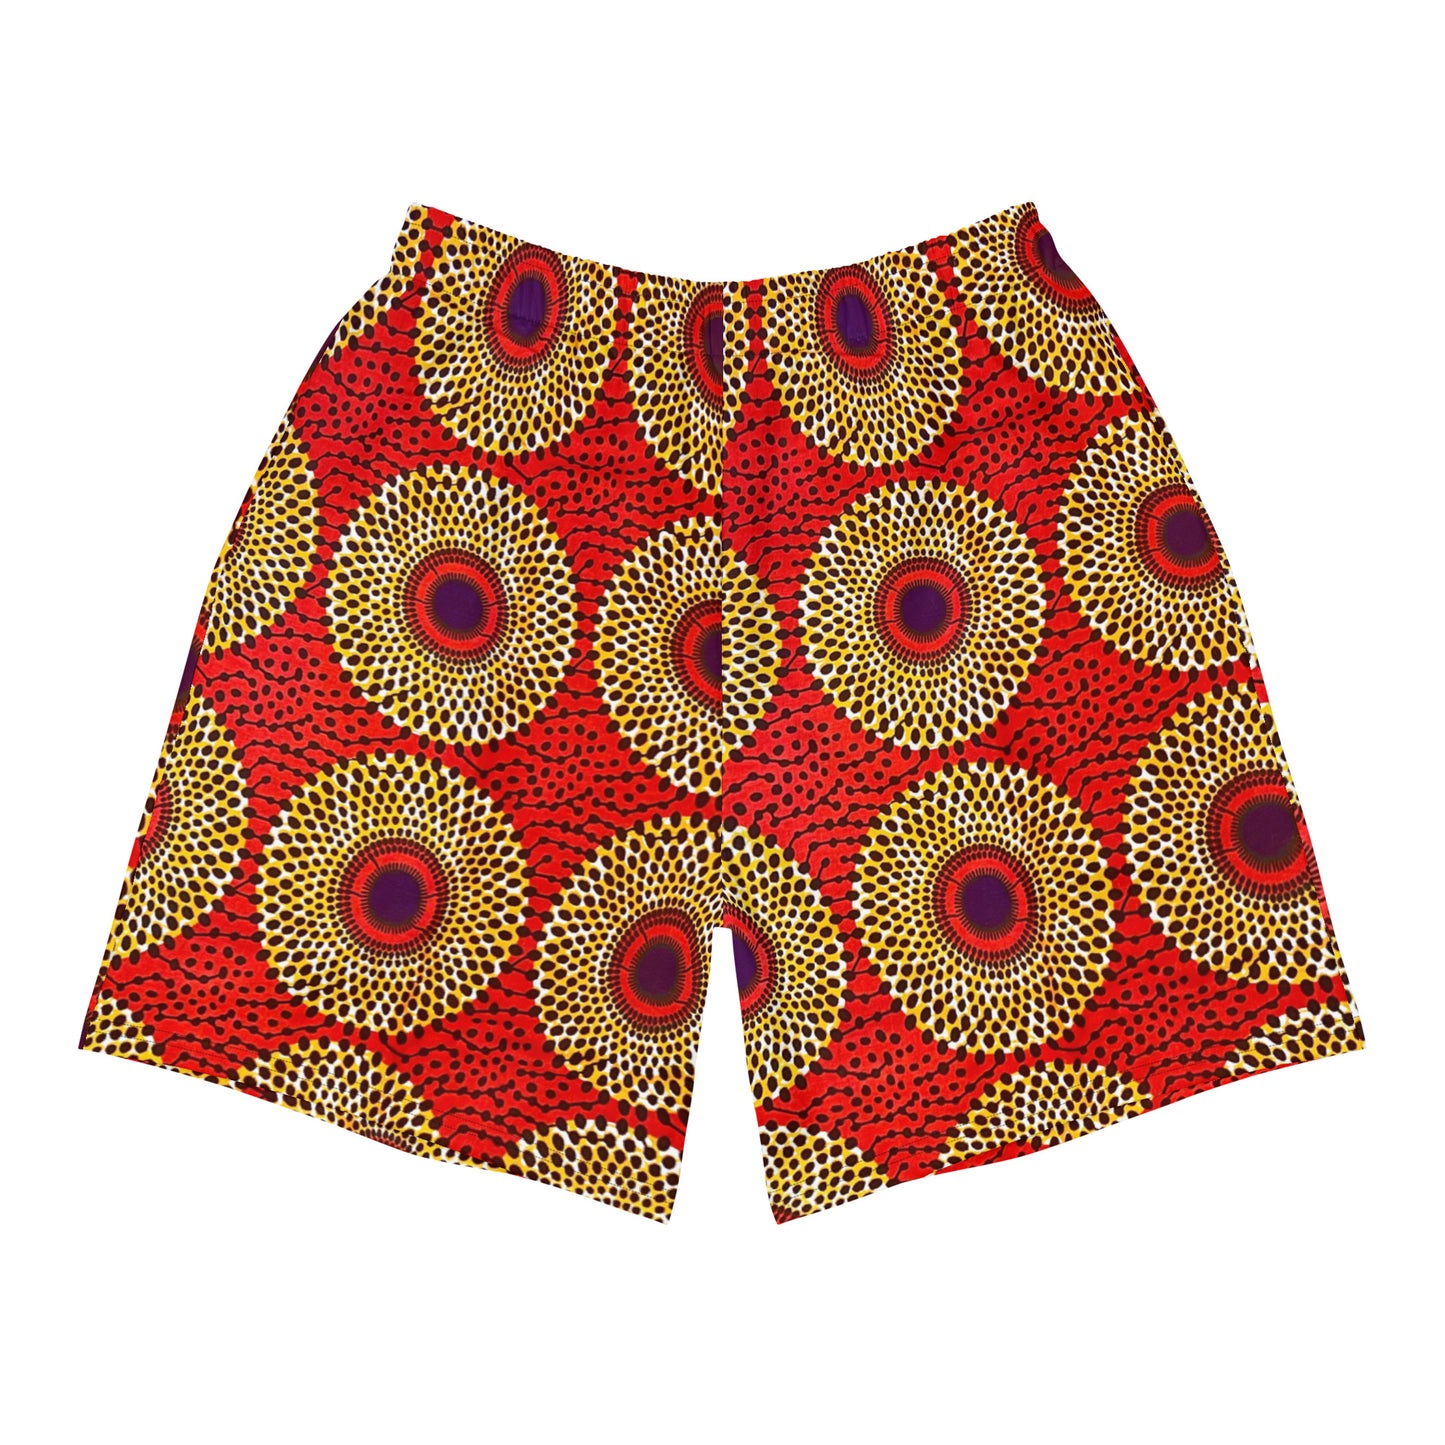 Rekiana African Print Men's Recycled Athletic Shorts